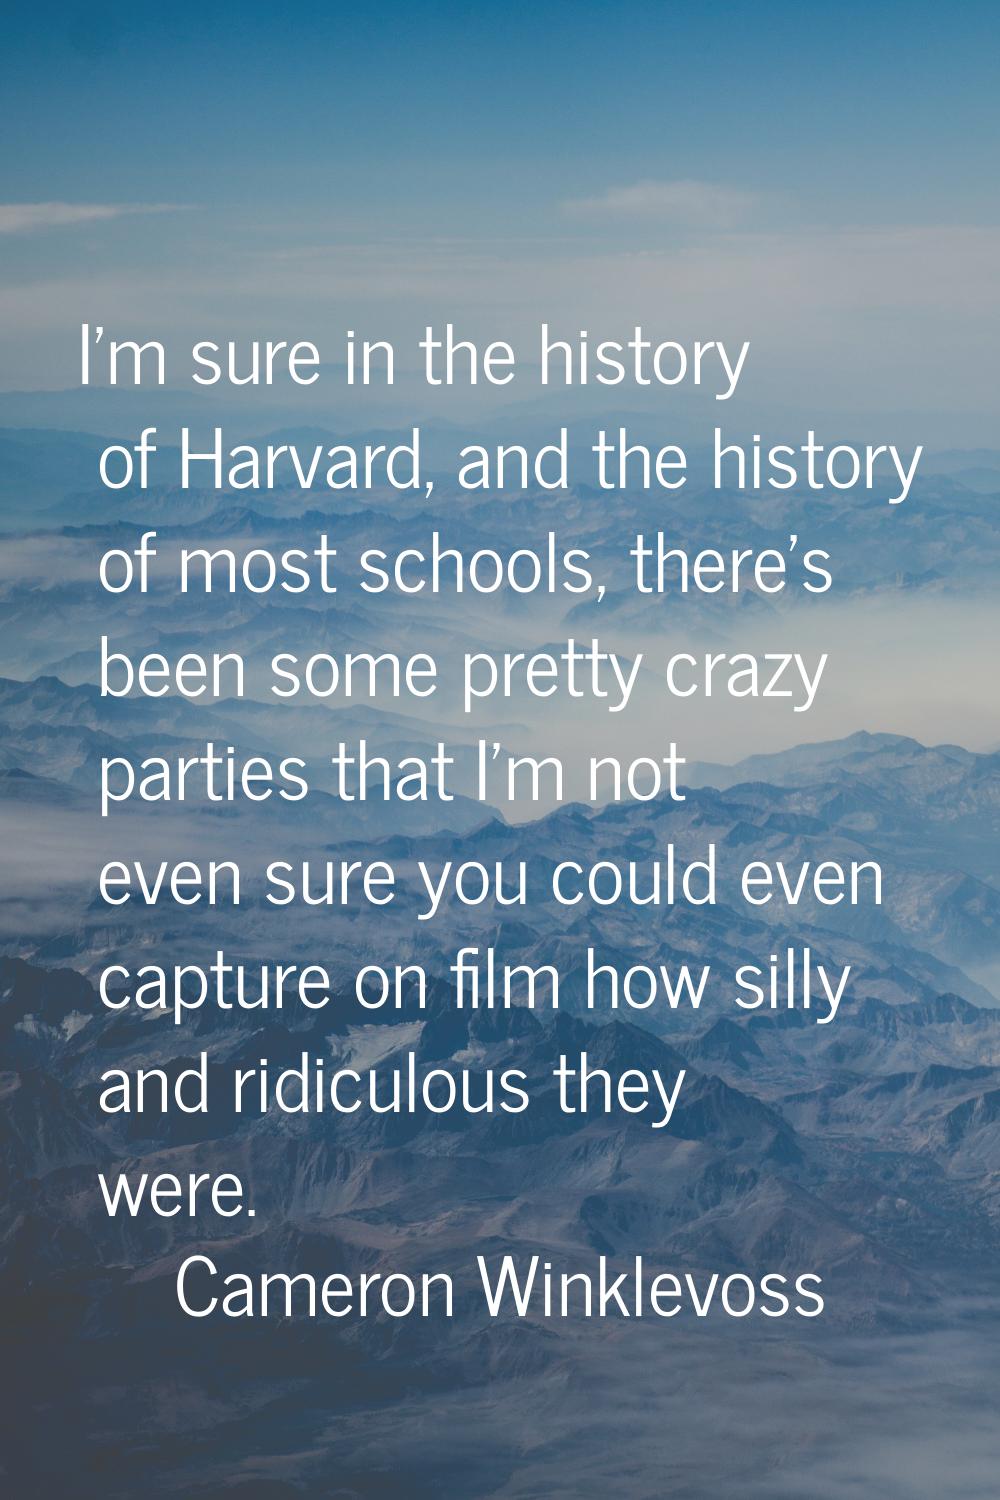 I'm sure in the history of Harvard, and the history of most schools, there's been some pretty crazy